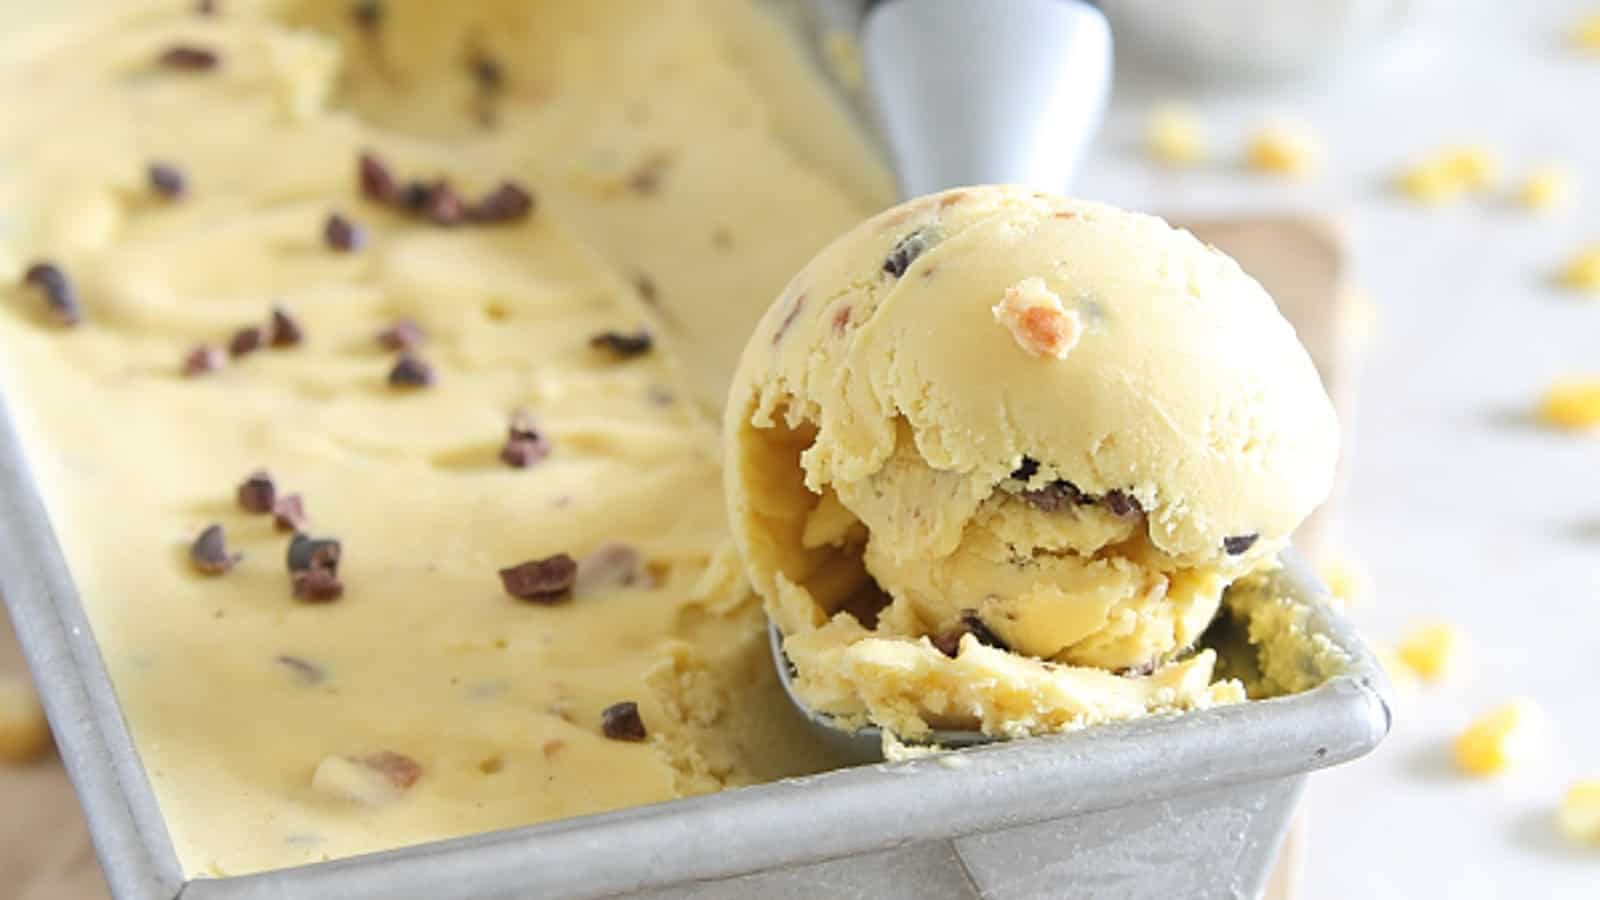 Sweet corn bacon ice cream in a tin with an ice cream scoop.